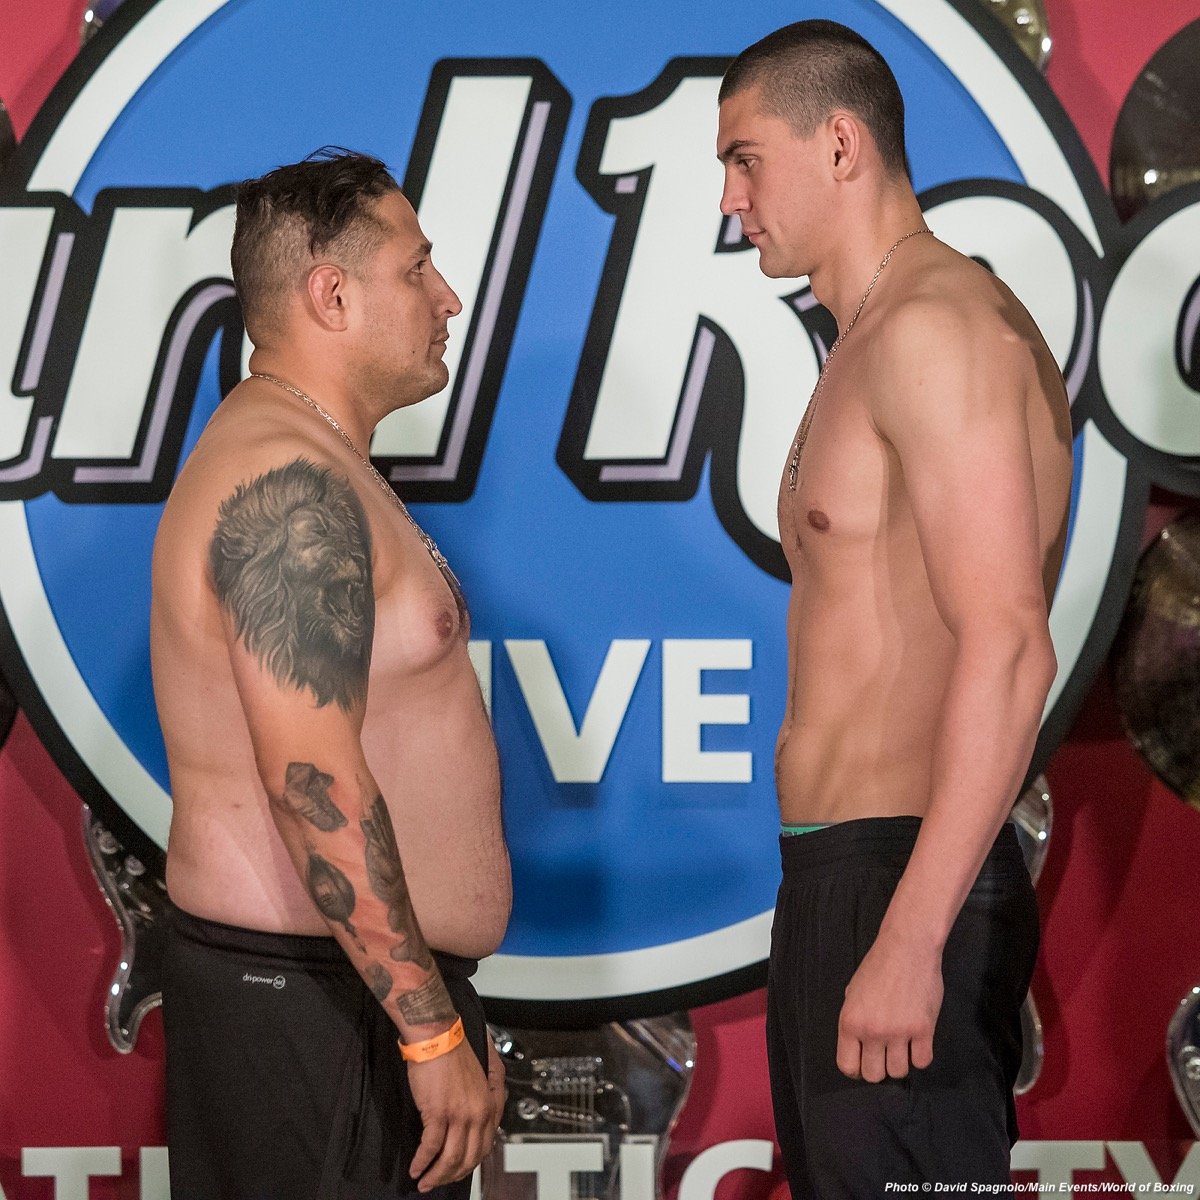 Dmitry Bivol and Jean Pascal Weigh In Results